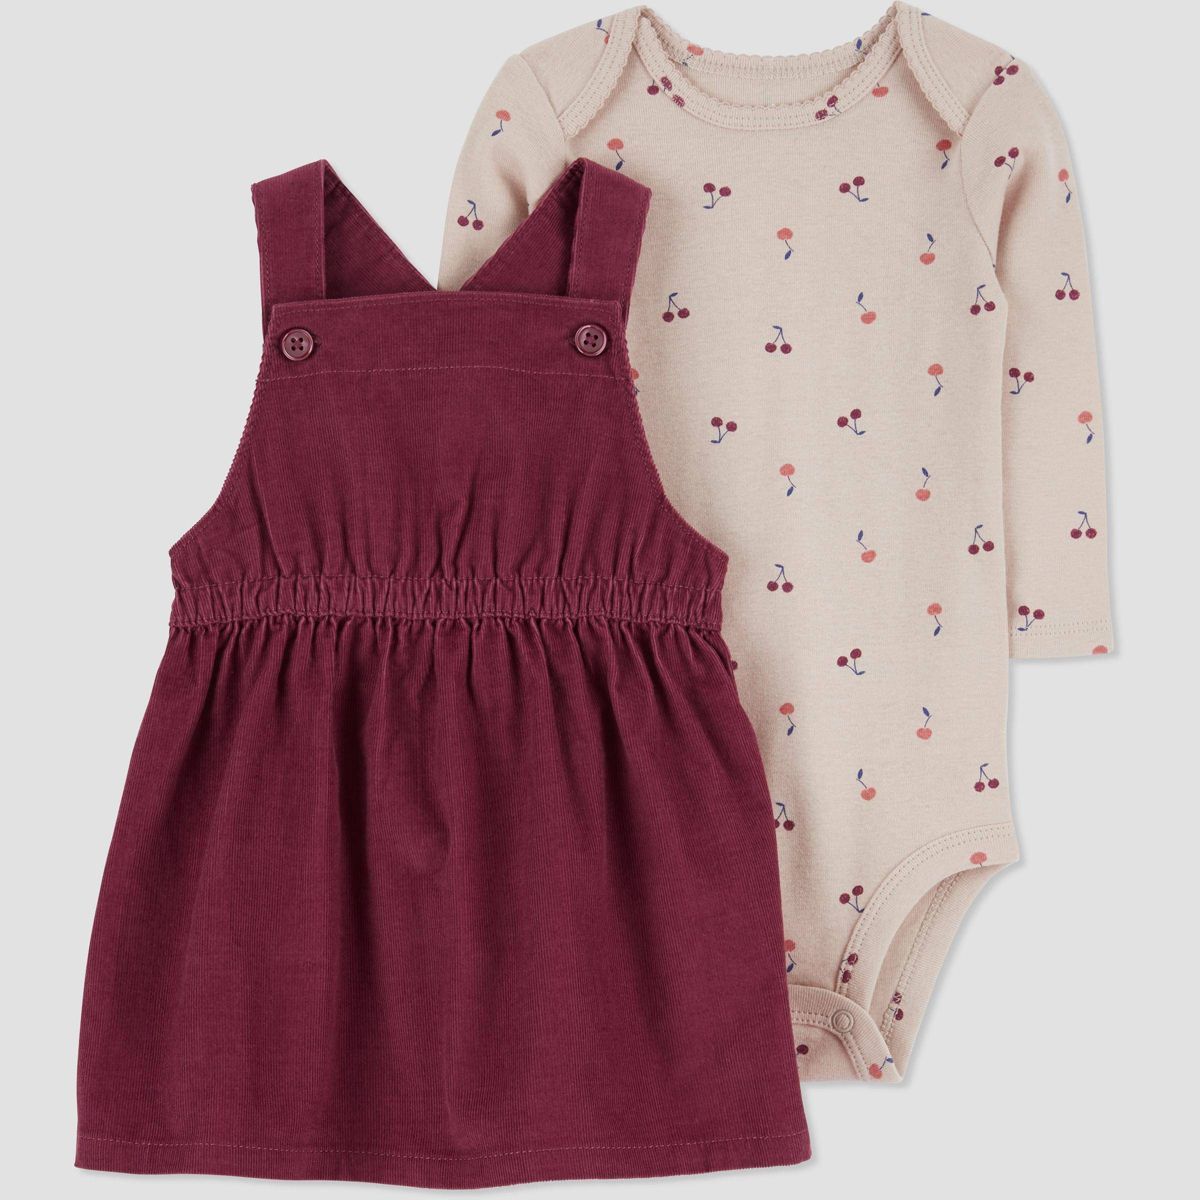 Carter's Just One You®️ Baby Girls' Cherry Top & Skirtall Set - Purple | Target